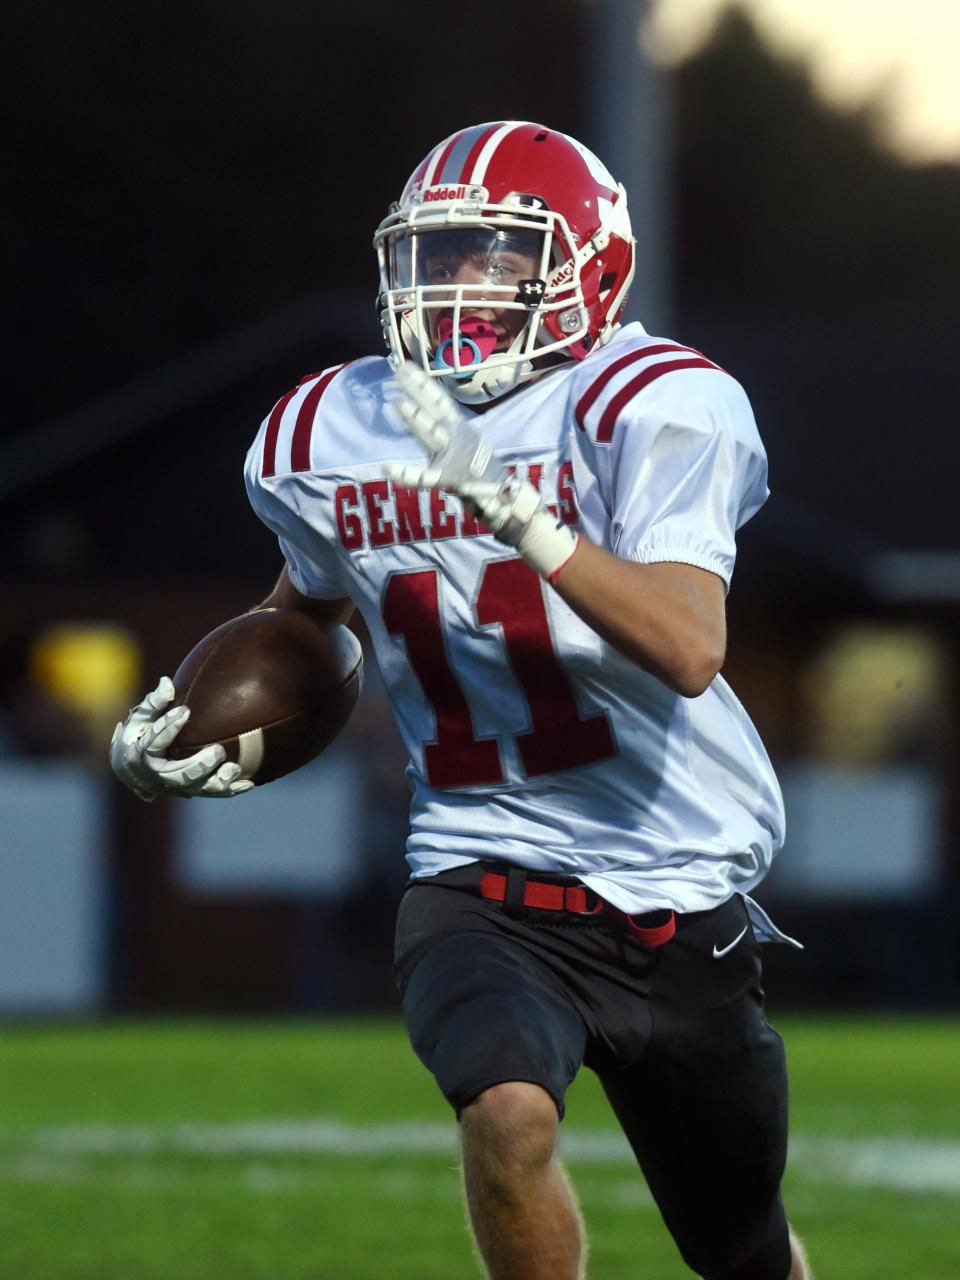 Sheridan's Andrew Holden races toward the end zone after catching a pass against River View during the 2021 season in Warsaw. Holden was the team's leader in receiving yards last season.